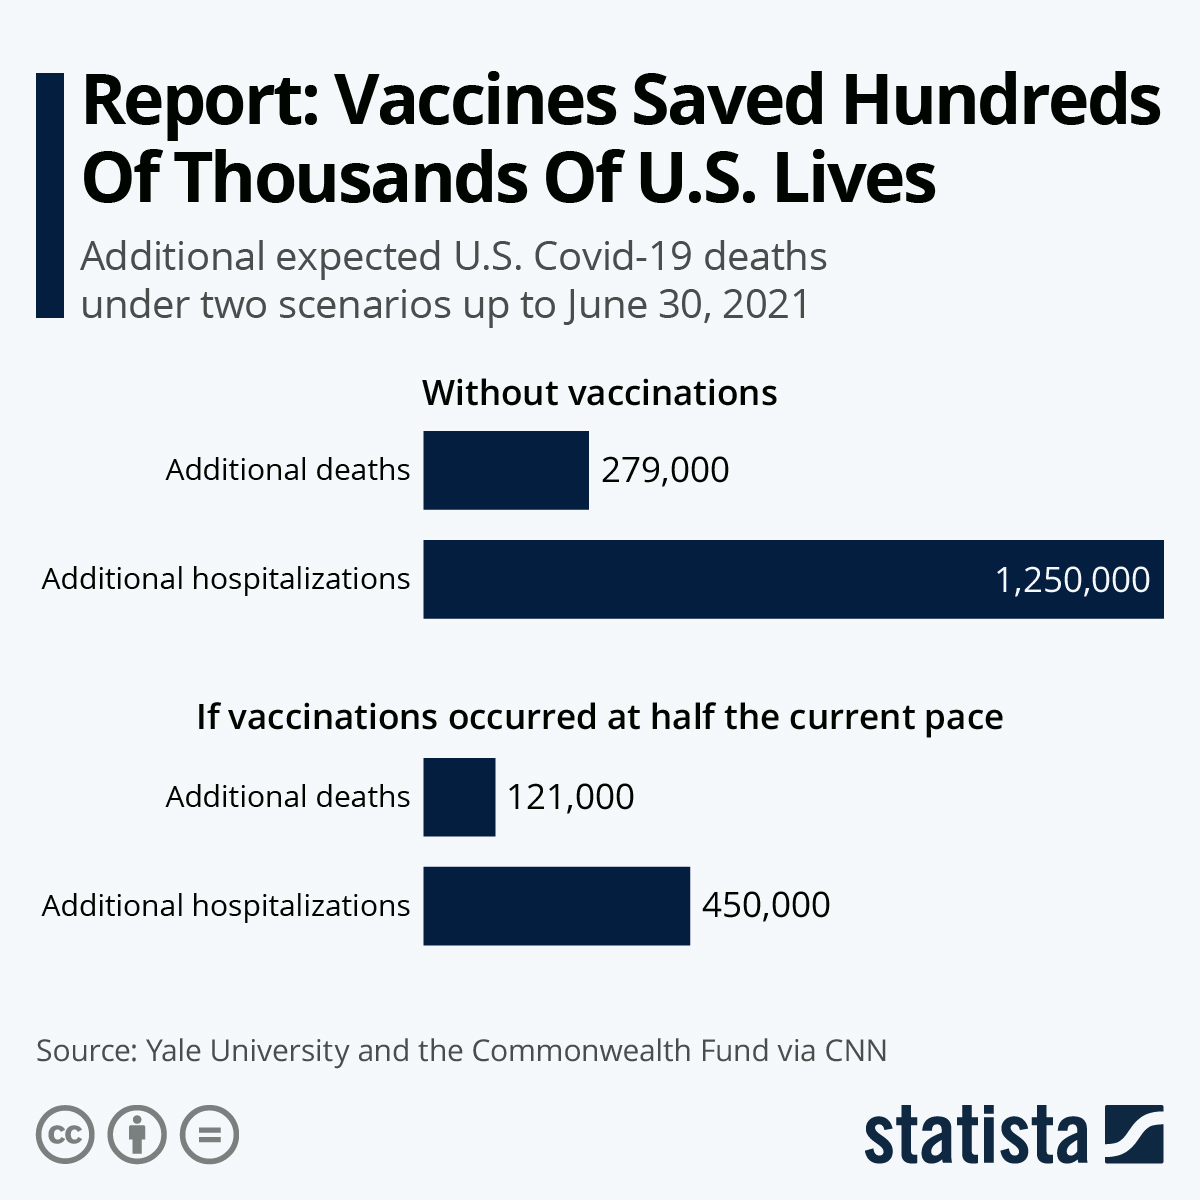 Report: Vaccines Saved Hundreds Of Thousands Of U.S. Lives